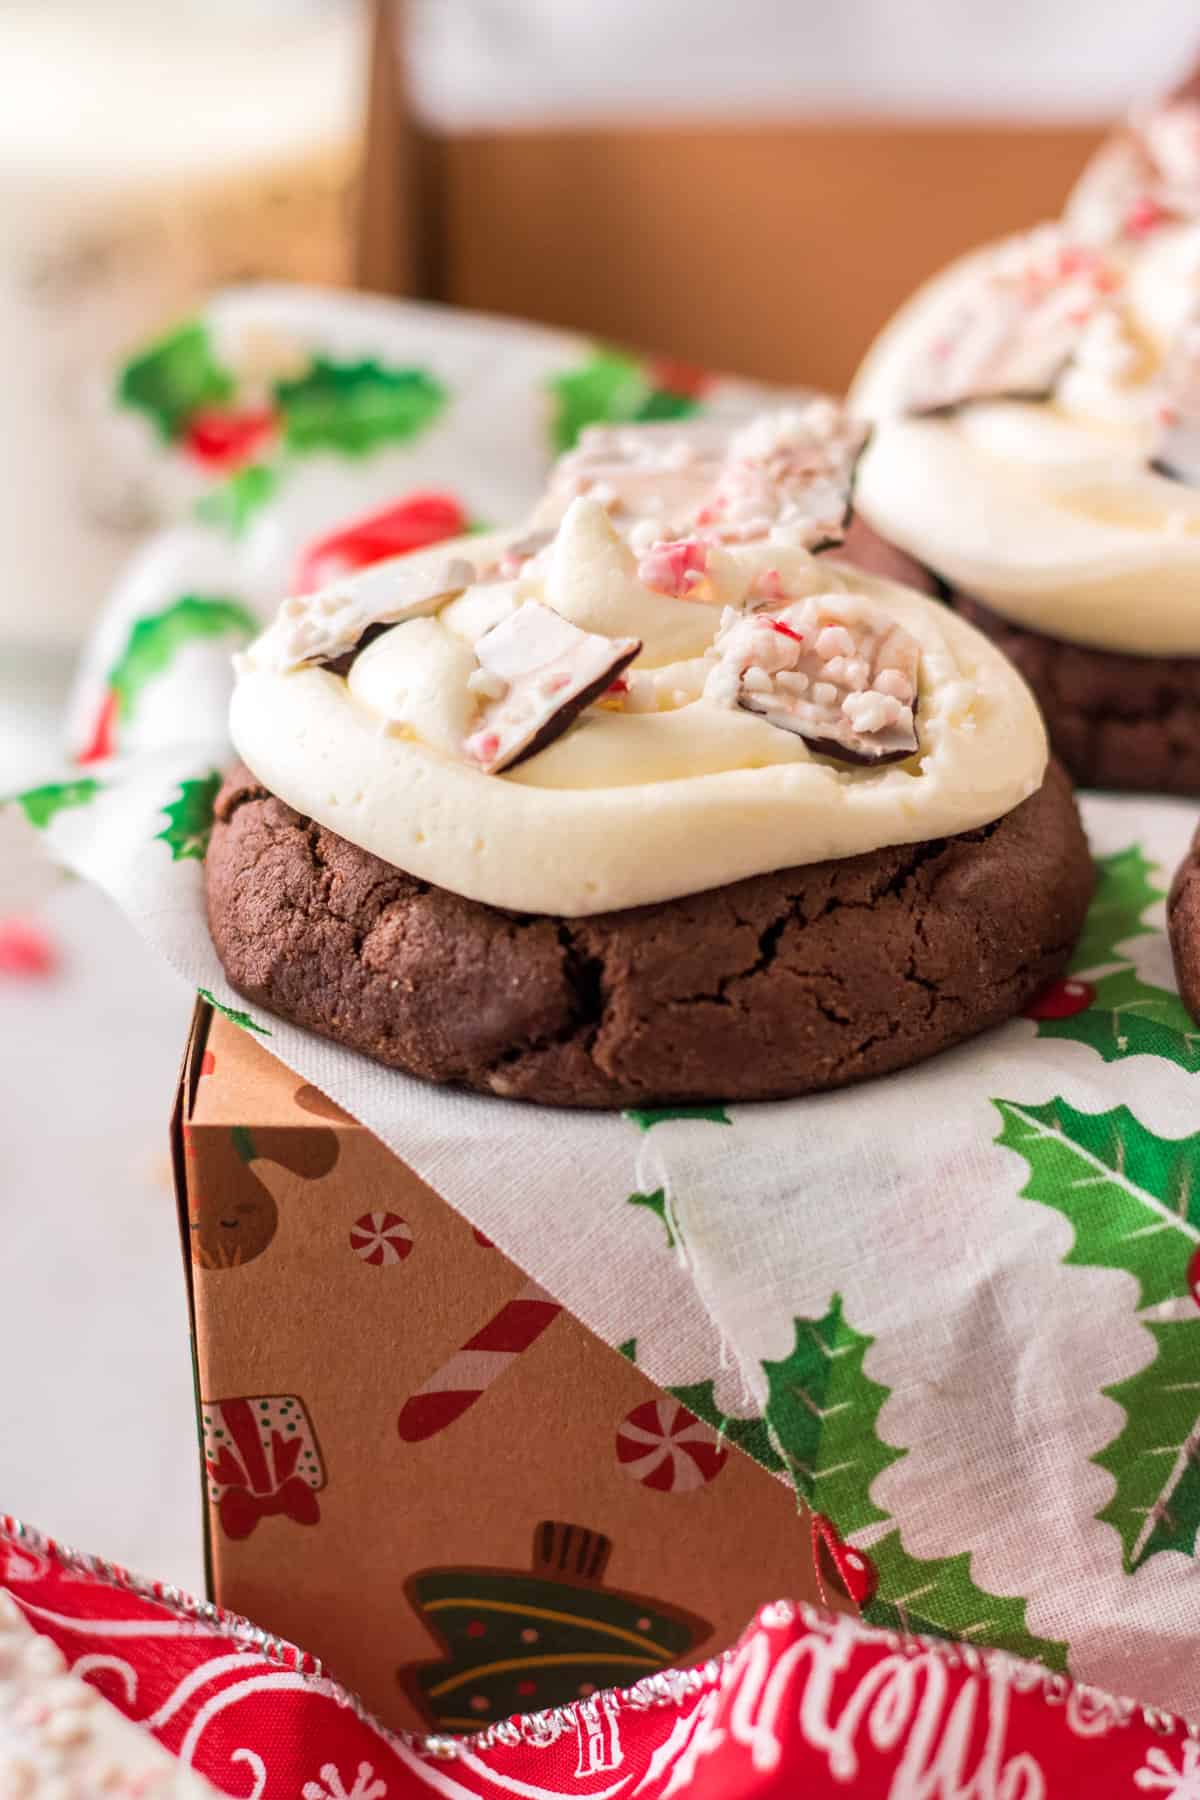 Chocolate peppermint cookie with buttercream frosting.